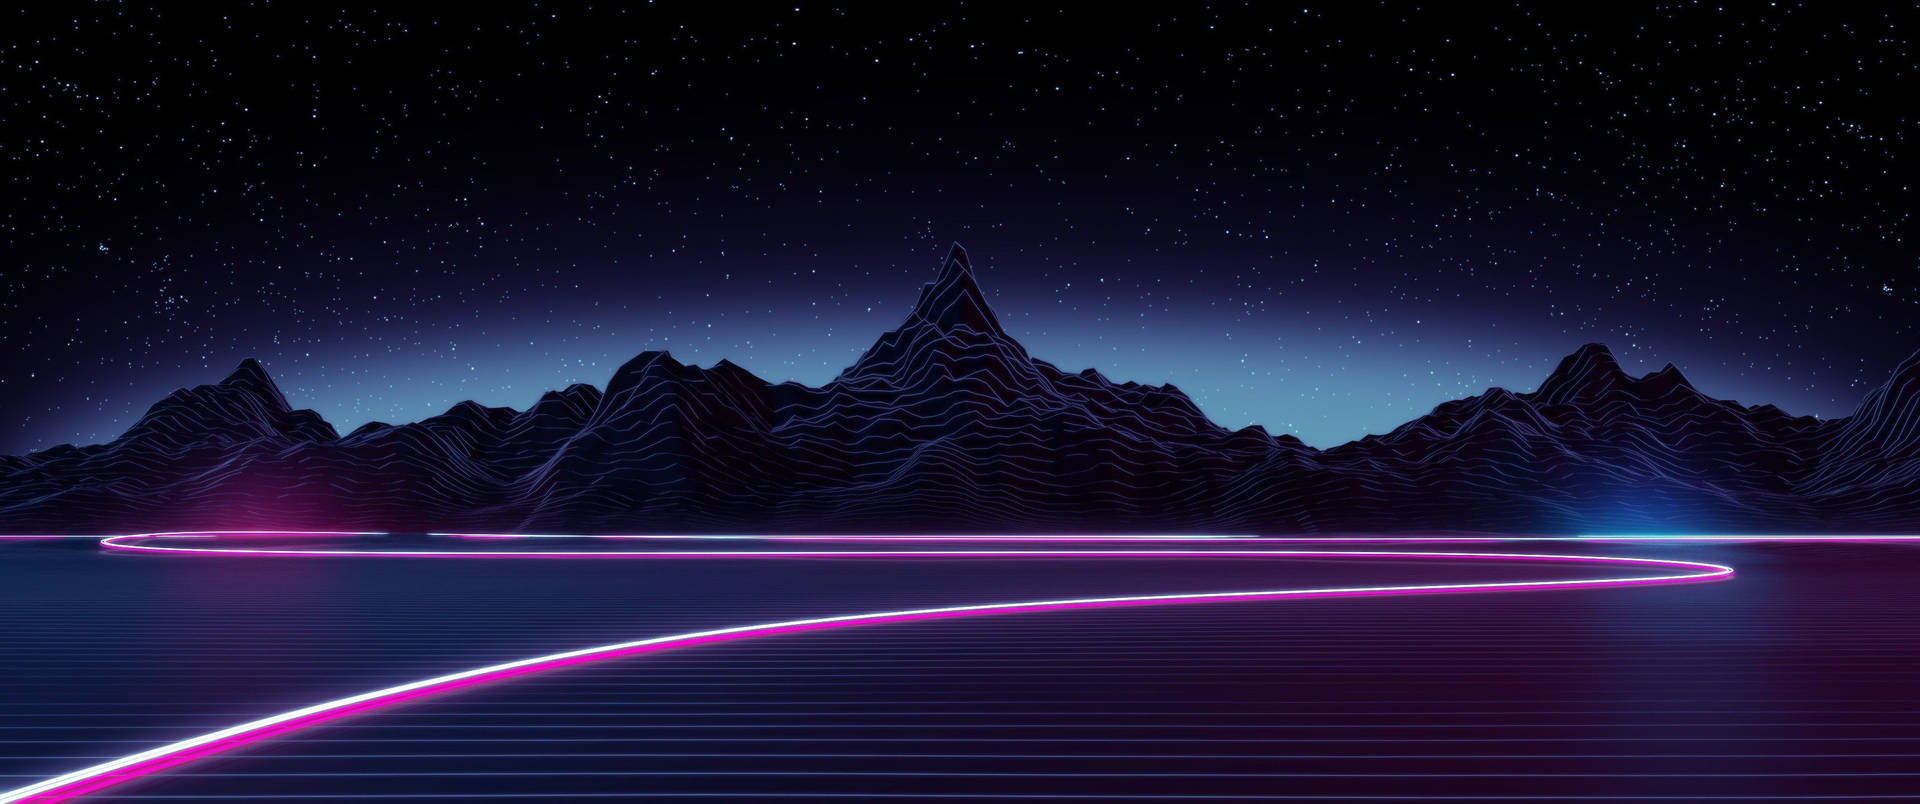 Retrowave Mountain Cover Background